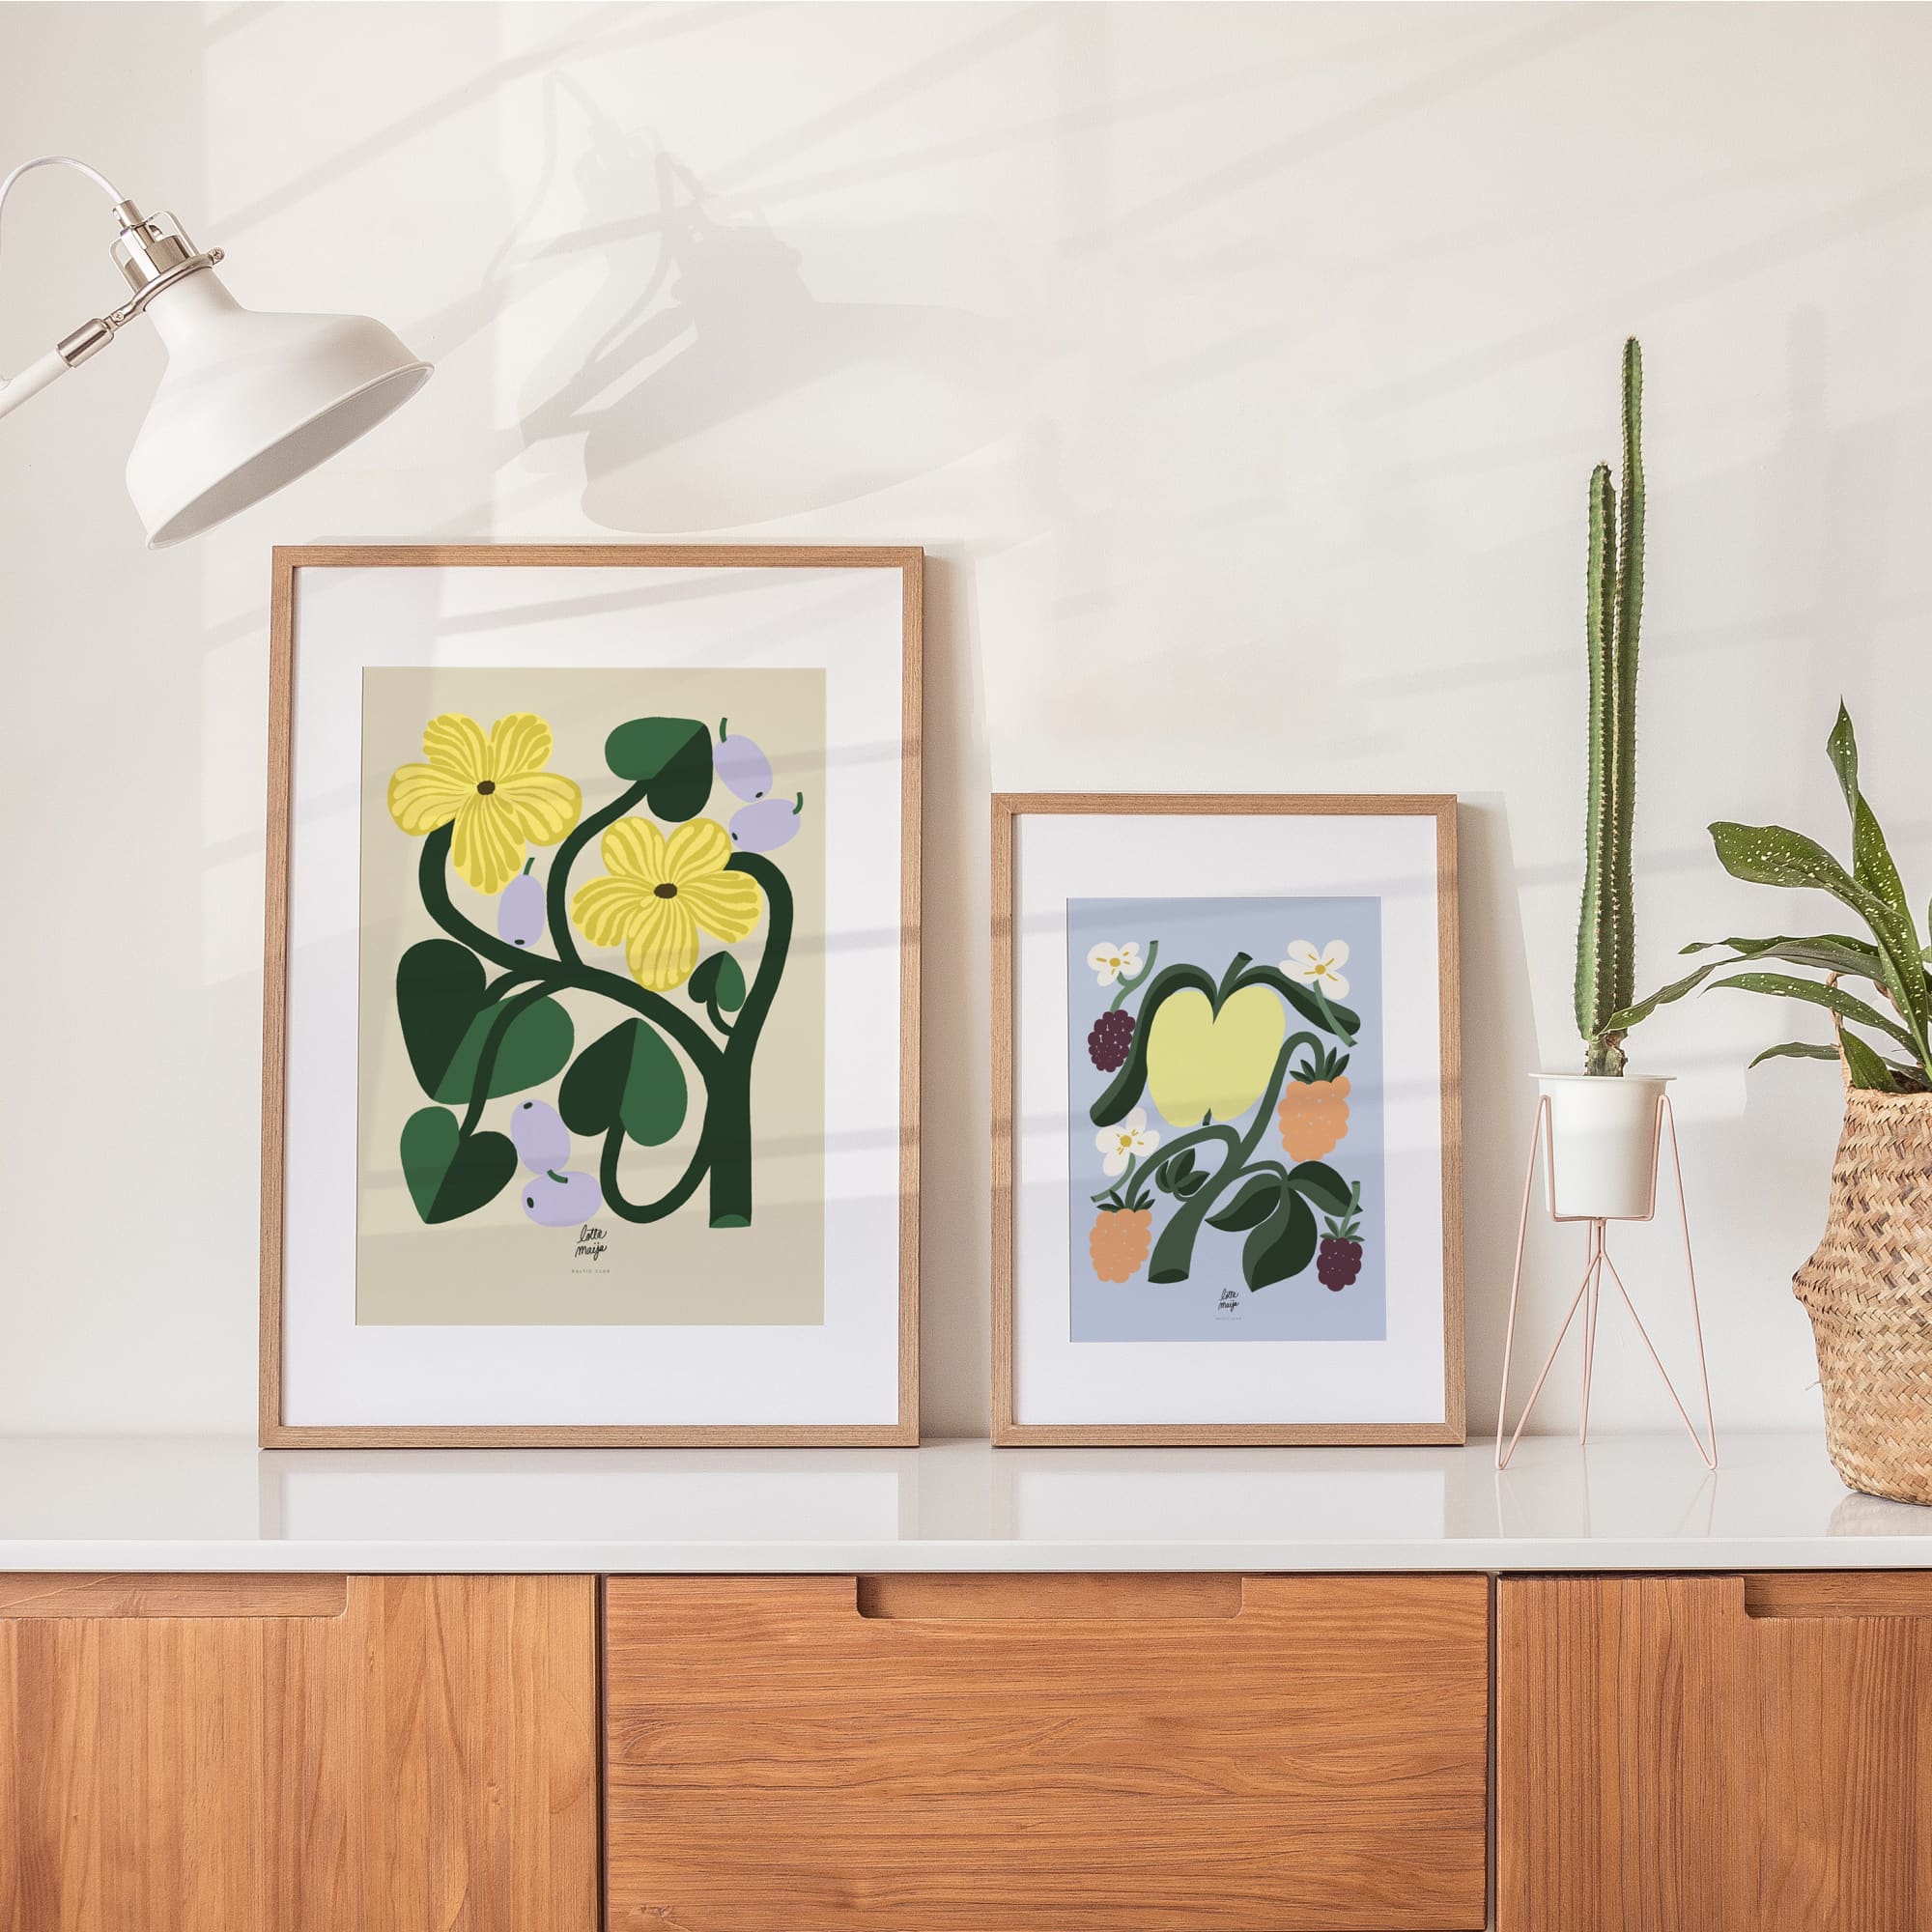 The Apple Art print from artist Lotta Maija, for the Baltic Club, in two different sizes